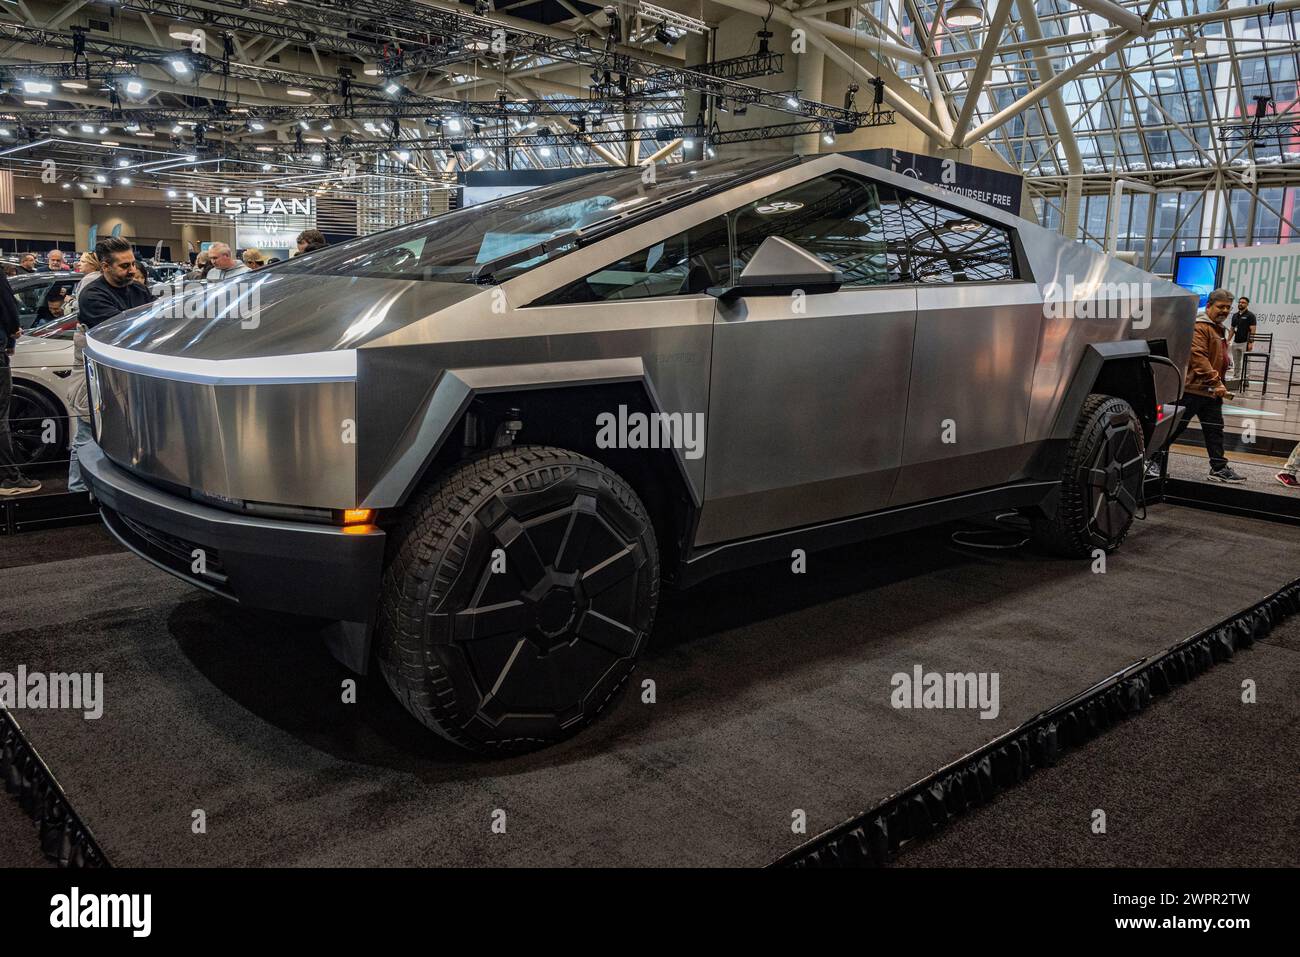 The Tesla Cybertruck is an electric pickup truck featuring a futuristic, angular design, advanced technological features, and a durable stainless stee Stock Photo